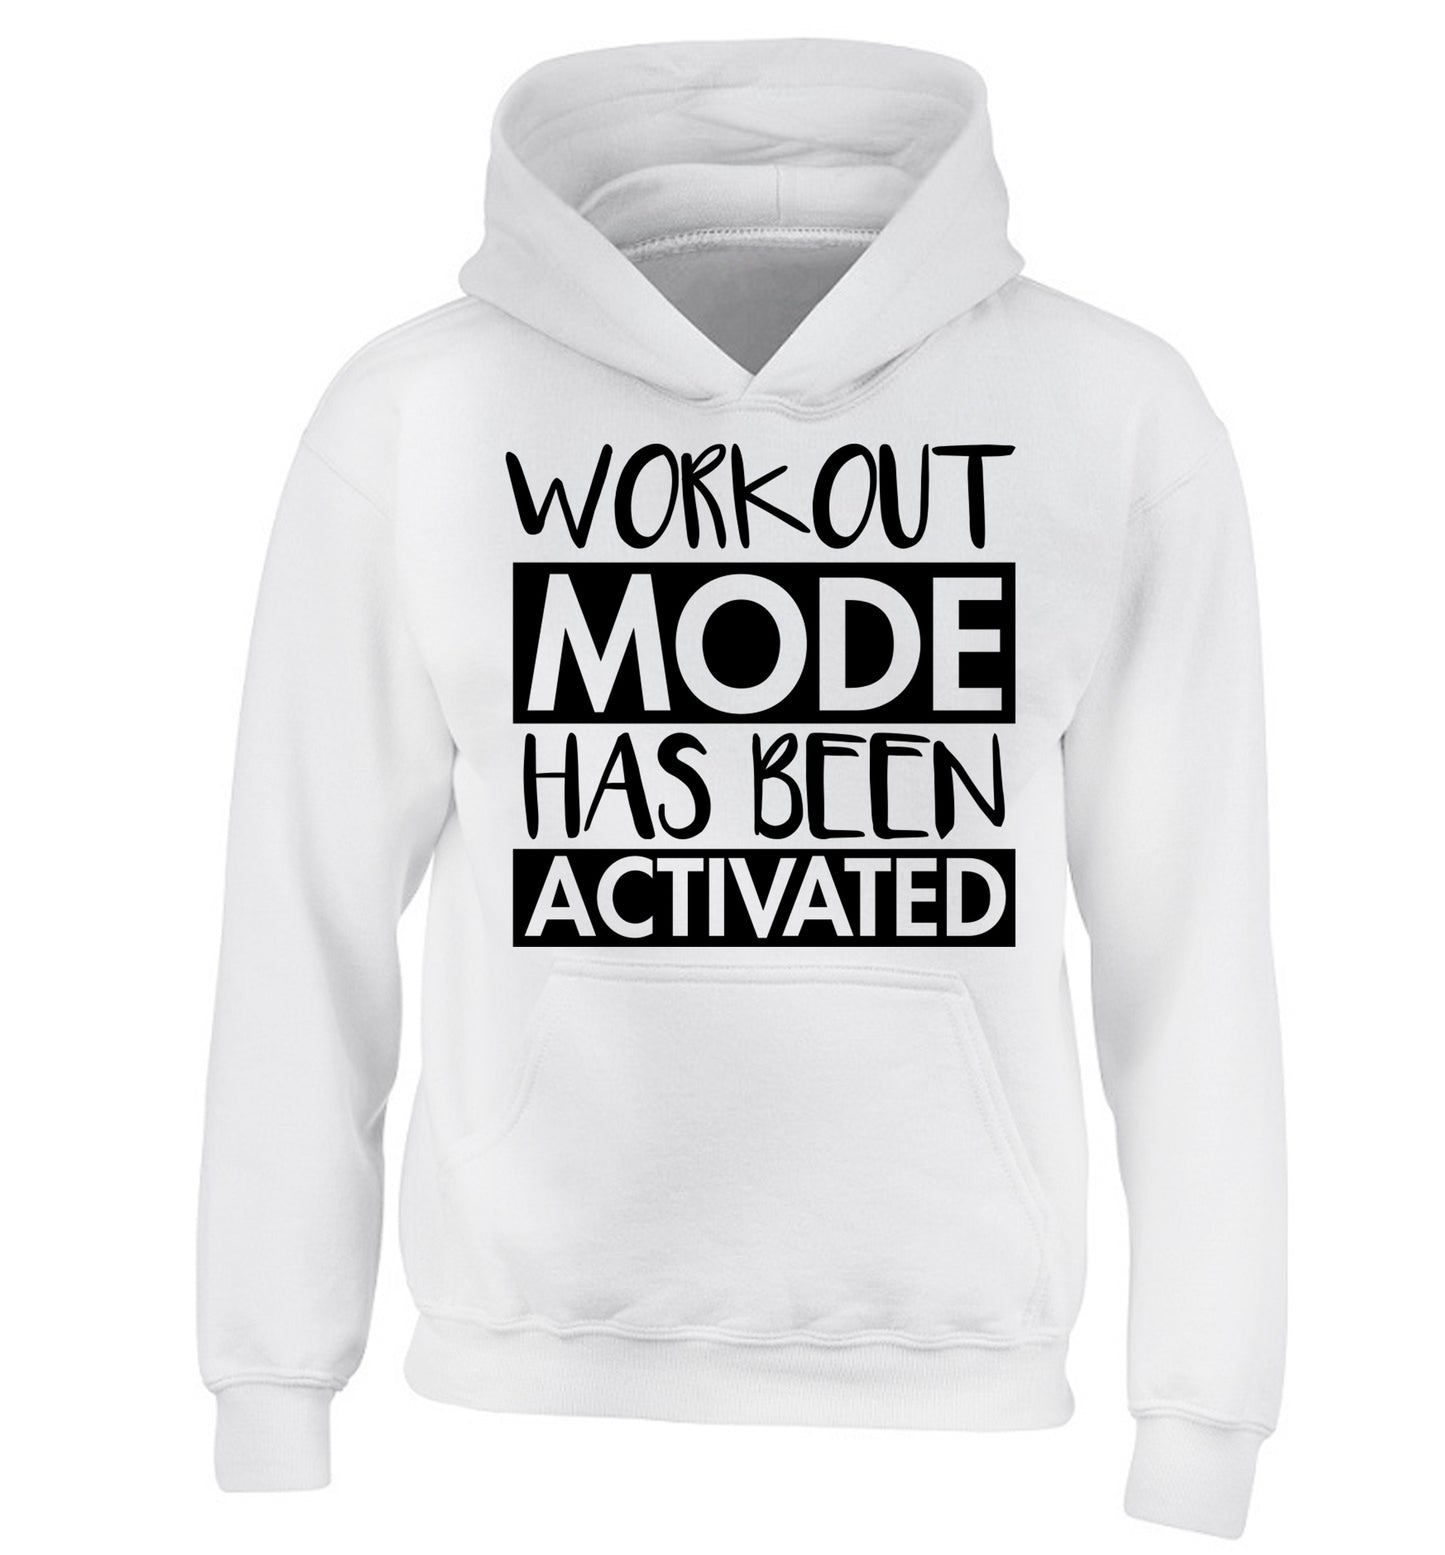 Workout mode has been activated children's white hoodie 12-14 Years